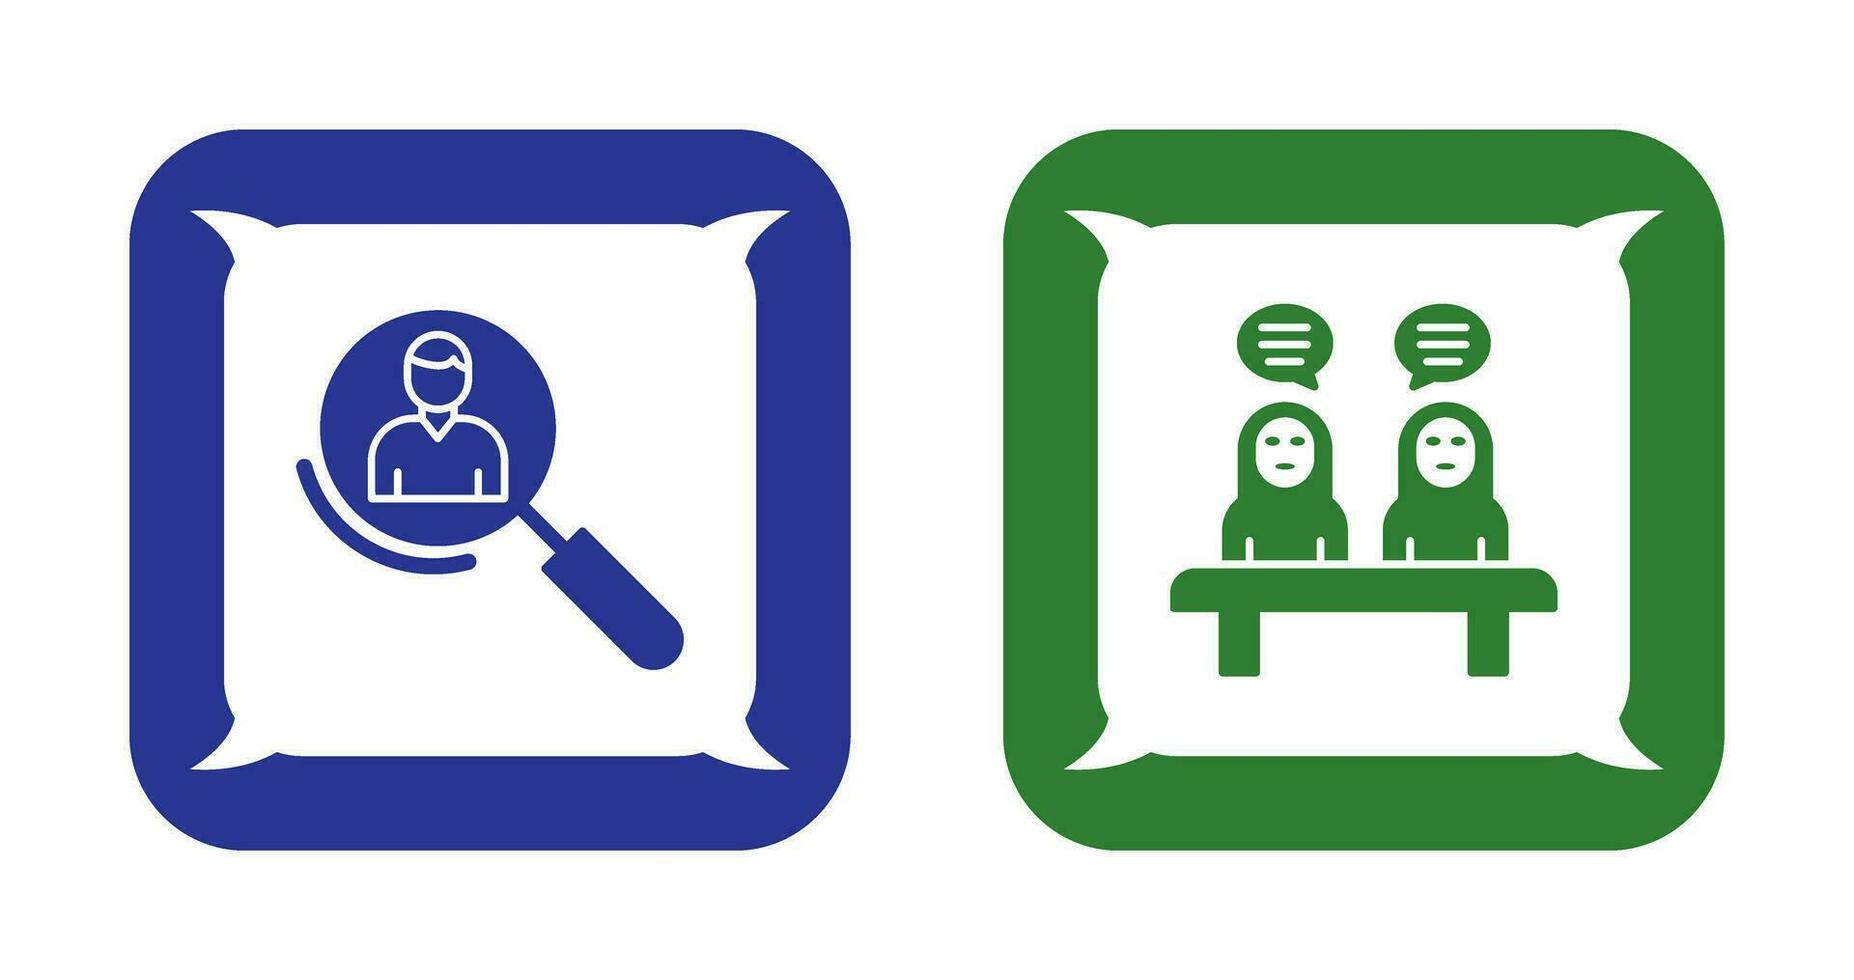 Magnifier and Meeting  Icon vector